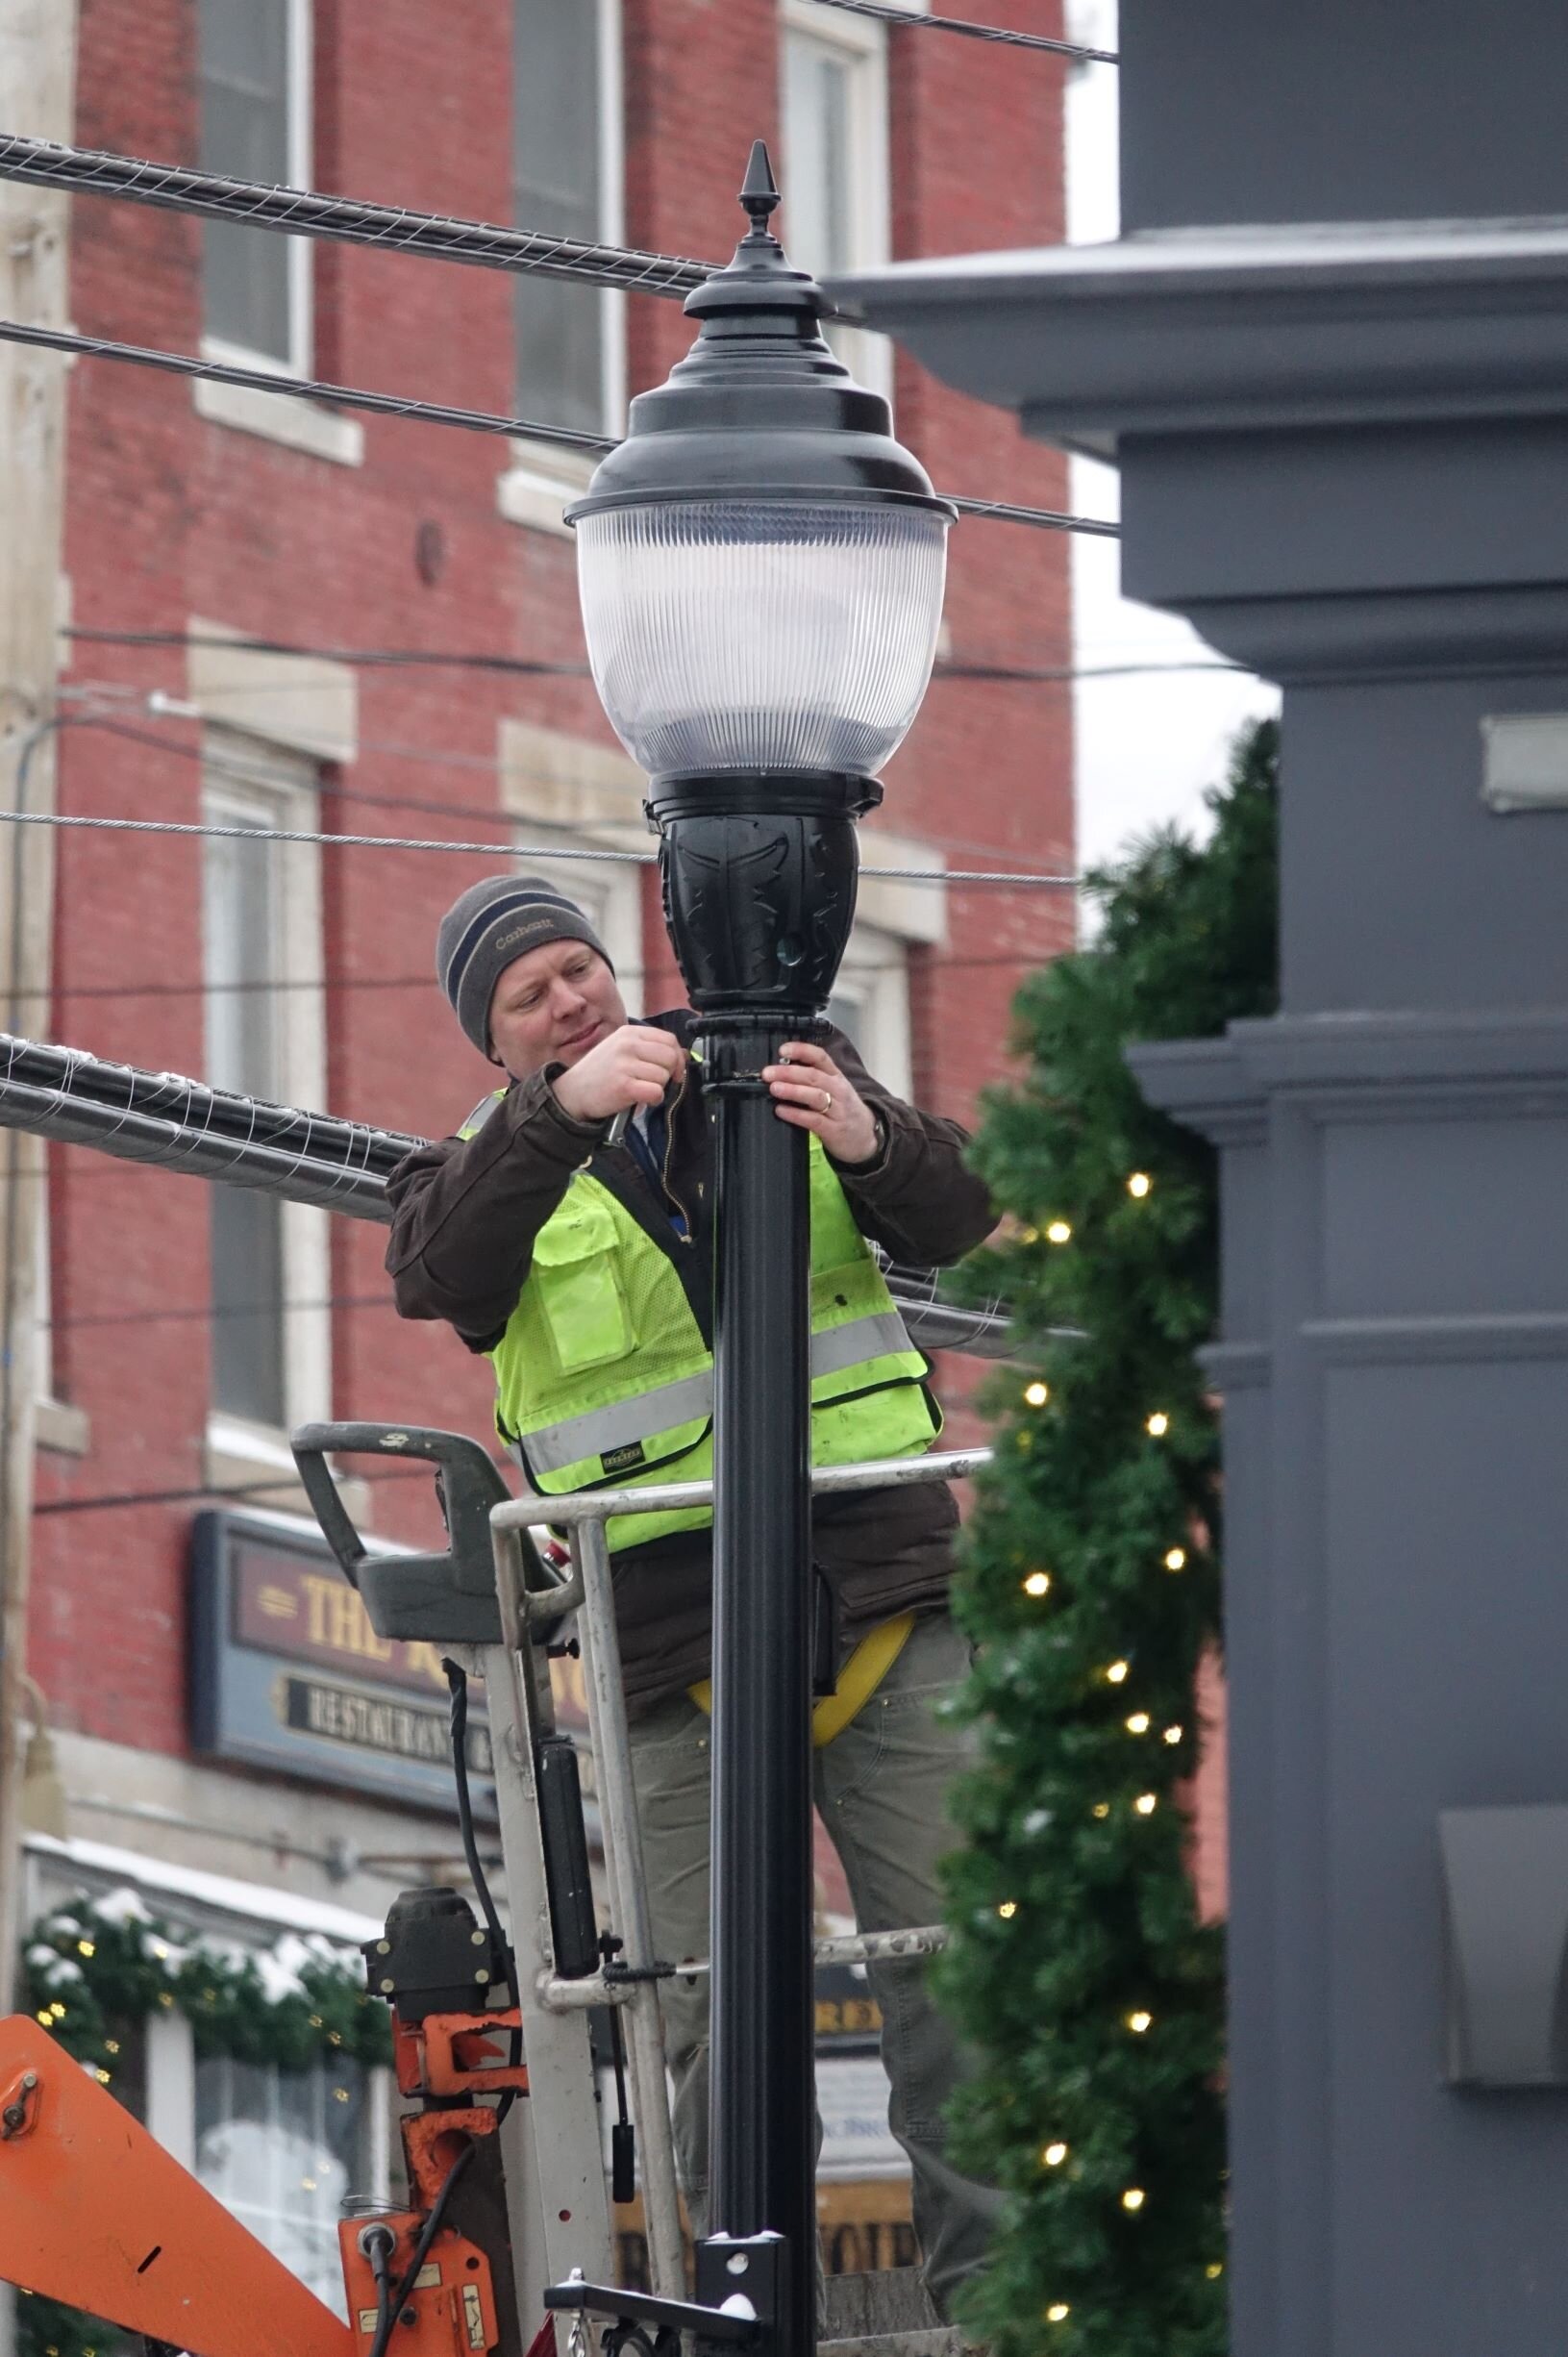   Last one out, put up the lights. Contractors continue working on street lights and signals as the Main Street reconstruction project wraps up for the winter. Photo by Gordon Miller.   